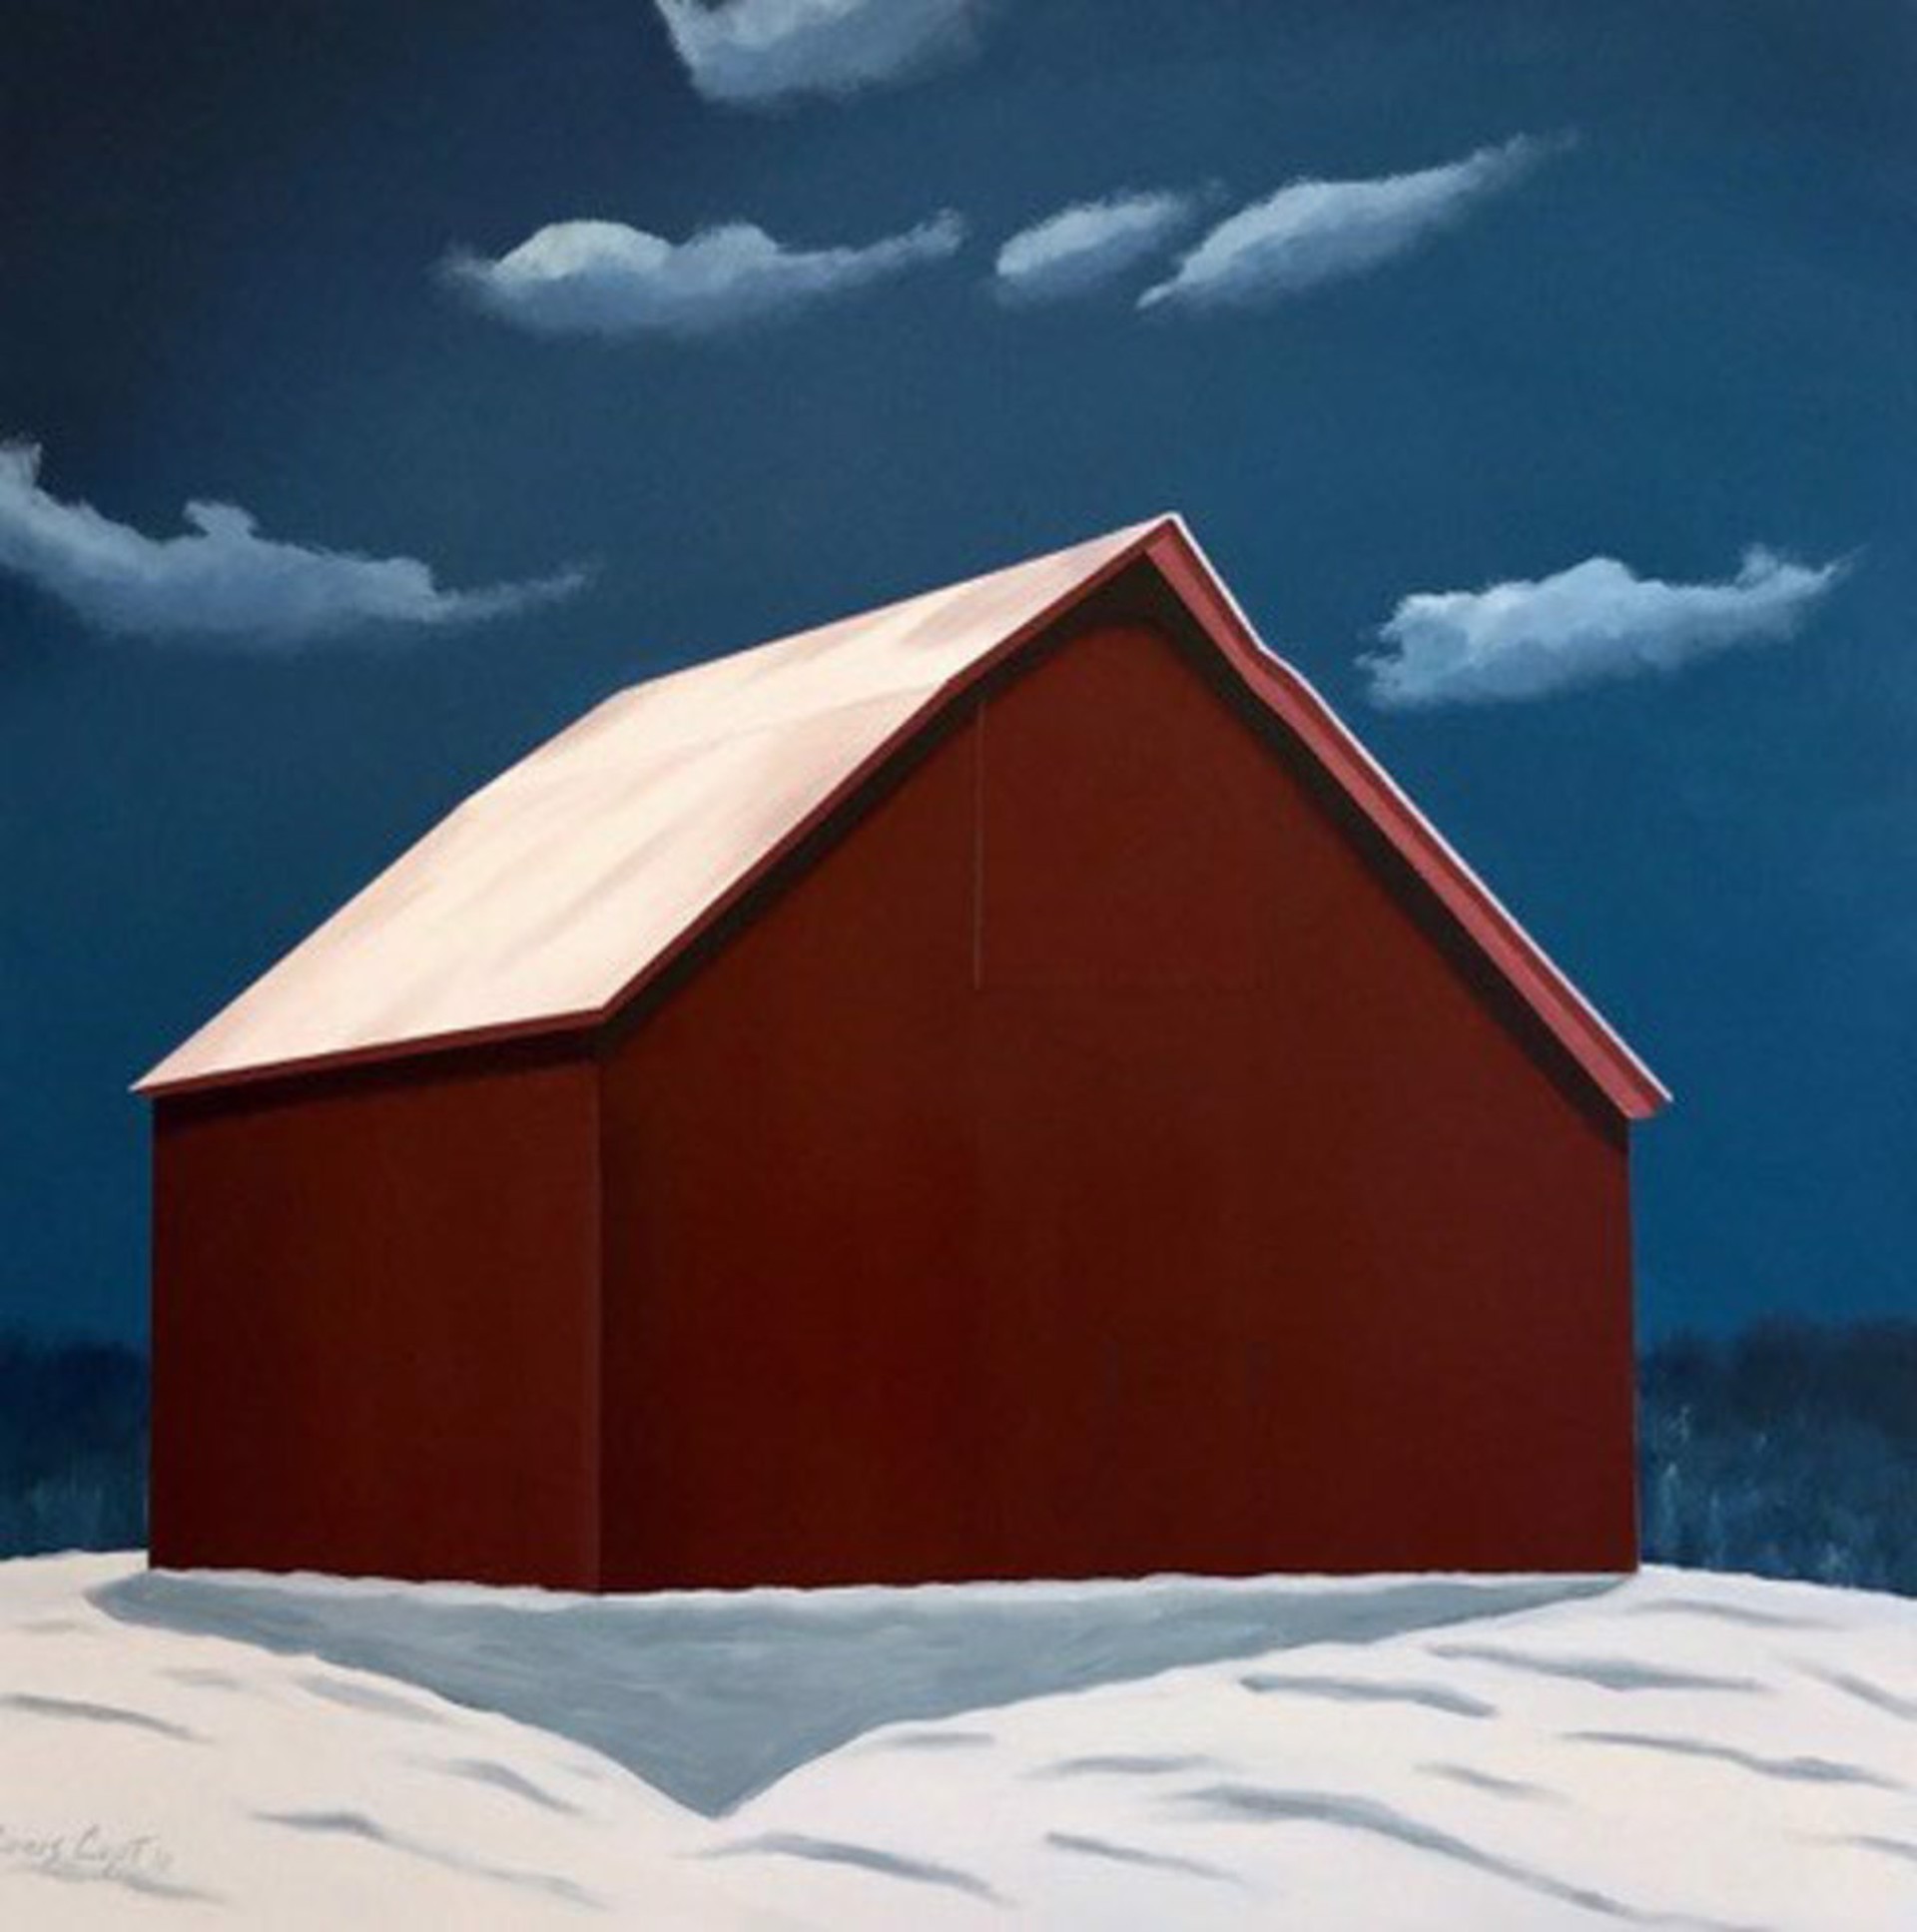 Winter Barn by Louis Copt